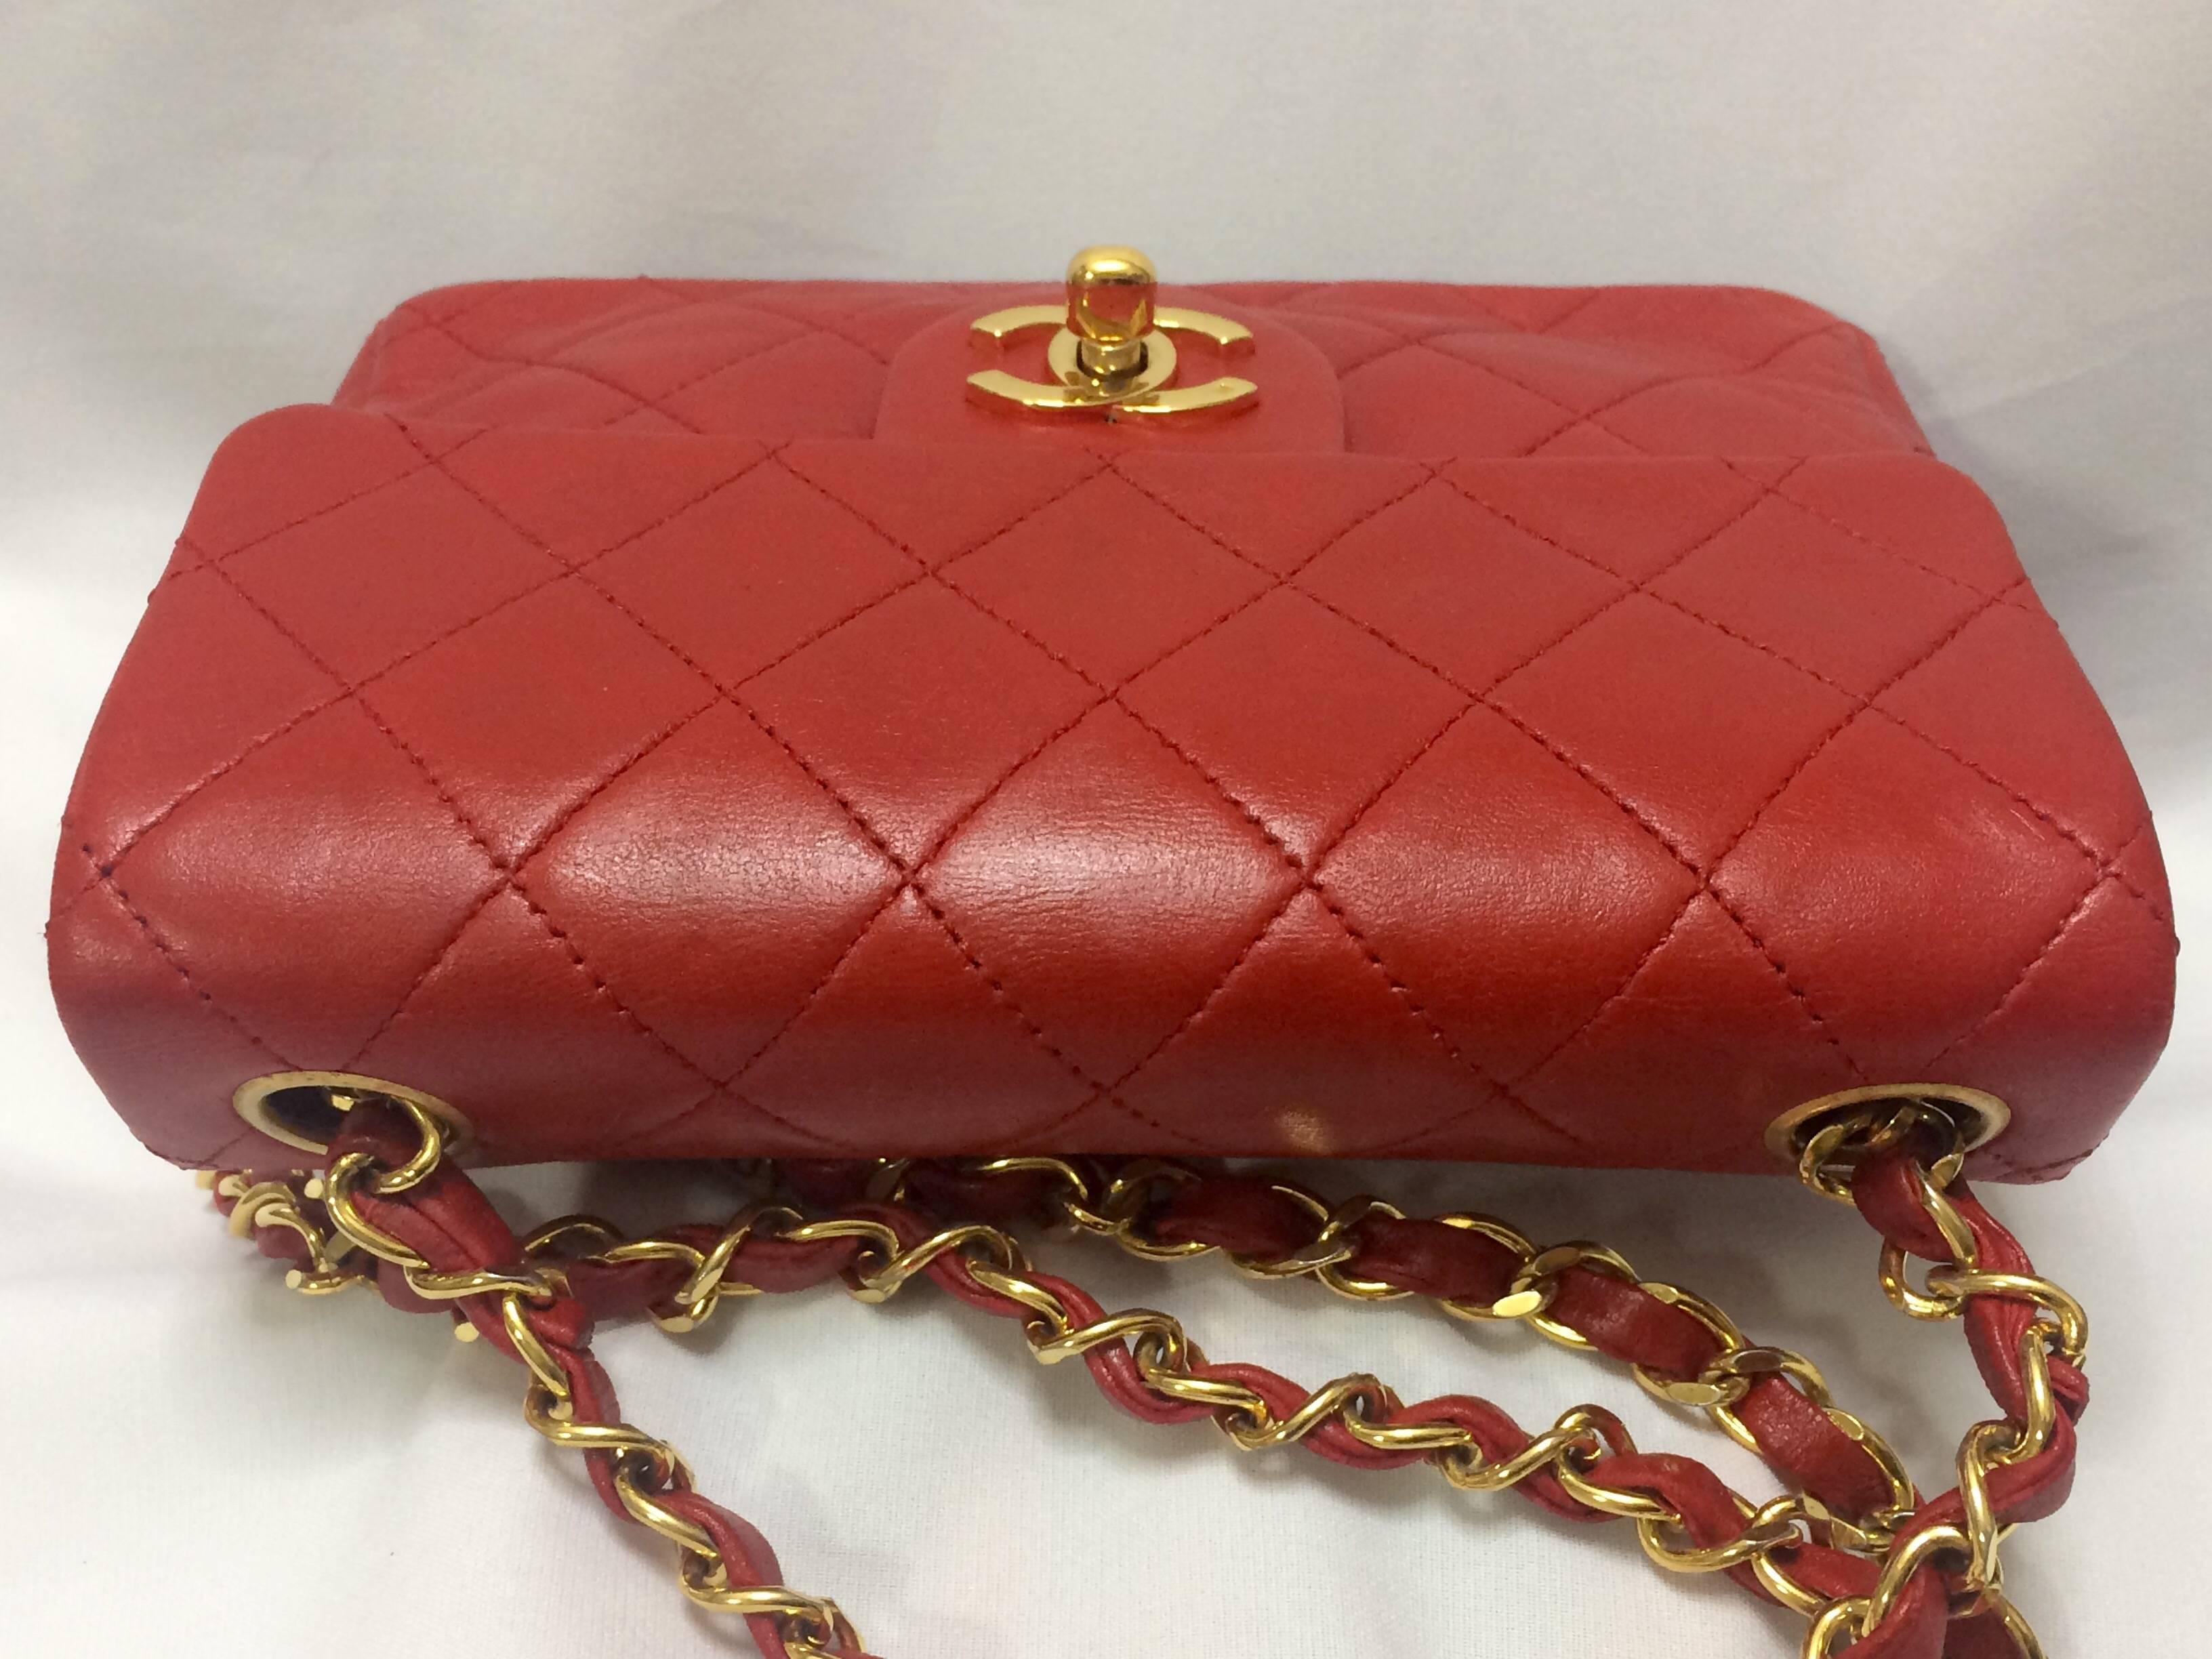 Vintage CHANEL lipstick red lambskin purse with golden CC and chain strap. 1